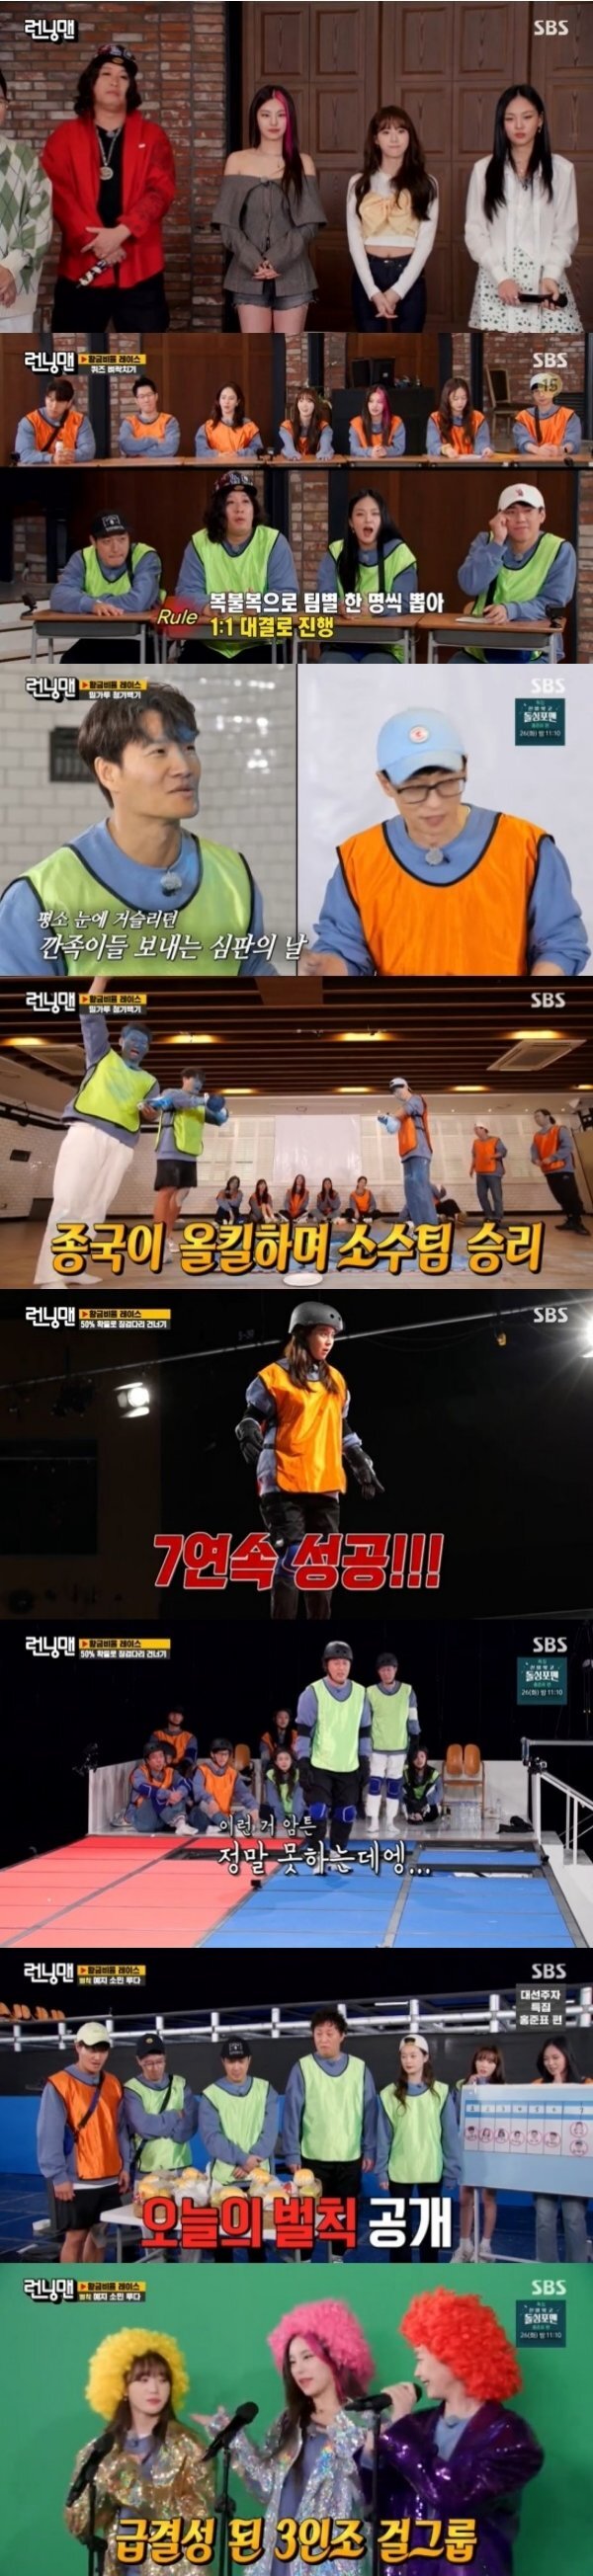 24 Days Running Man recorded an average audience rating of 5.9% (hereinafter based on Nielsen Korea Seoul Capital Area).The highest audience rating per minute jumped to 10.3%, and the 2049 audience rating, the main indicator and target indicator of advertisers, also showed 3.2% (based on Nielsen Korea Seoul Capital Area, household).The broadcast was decorated with Golden Ratio Race, and guest Min-ji, singer Bibi, ITZY Yezi and WJSN Luda, representing the MZ generation, joined together.The members cheered all the guest appearances, but they laughed at the appearance of Min-ji.The Golden Ratio Race was a quiz showdown in which one captain gave the number while conducting the keyword mission every round, and PD drew a number to decide the team.Kim Jong-kook became the captain, while Yang Se-chan, Haha, MC Min-ji and Bibi became a minority team of empties.However, the quiz showdown was unexpected and a minority team won.The second race was teamed with Kim Jong-kook, with Ji Suk-jin being selected as the captain and PD picking up two.The showdown of Somewhere Sick Hearing White Age unfolded and the appearance of absolute strongman Kim Jong-kook left many teams in fear.This game, which had to be punched with flour buried and ordered by MC, was a game in favor of Kim Jong-kook, who was ahead of power.Among them, Kim Jong-kook and Min-ji were the big laughs. Kim Jong-kook said, Even if you swing, it fits well.The face area is wide, and Min-ji laughed, It hurts a little, is not this a funny game?Eventually, Min-ji didnt hit a single and the Ji Suk-jin team won.The final race had to cross the stepping stones only with a tentacle; members complained of fear in the extreme situation where they had to Choices the broken styrofoam and hard wooden-plate legs at 1/2 odds.Song Ji-hyo, the King of the Speech, was also nervous, but he overcame a huge probability battle and threw up the chorus of seven consecutive wooden legs.Yang Se-chan stepped up after the same team Bibi was eliminated immediately.Yang Se-chan laughed at his smile, saying, I will go to Kong in Gangshi mode. He went forward without hesitation, but his wooden legs broke into his unexpected knife and gave a bigger smile.The scene was the highest audience rating of 10.3% per minute, accounting for the best one minute.Thanks to Song Ji-hyos performance, Kim Jong-kooks team easily crossed the bridge, and opponents Ji Suk-jin, Min-ji, Luda, Jeon So-min, Haha and Yezi did not advance more than a step.The final result was Kim Jong-kook first, Song Ji-hyo second, and Jeon So-min, Luda and Yezi received penalties.The three penalties danced for a minute to the Min-ji, ITZY and WJSN songs with cute makeup.The penalty video of the three penalty players who turned into a three-member new girl group can be found through the official Instagram Reels of Running Man.